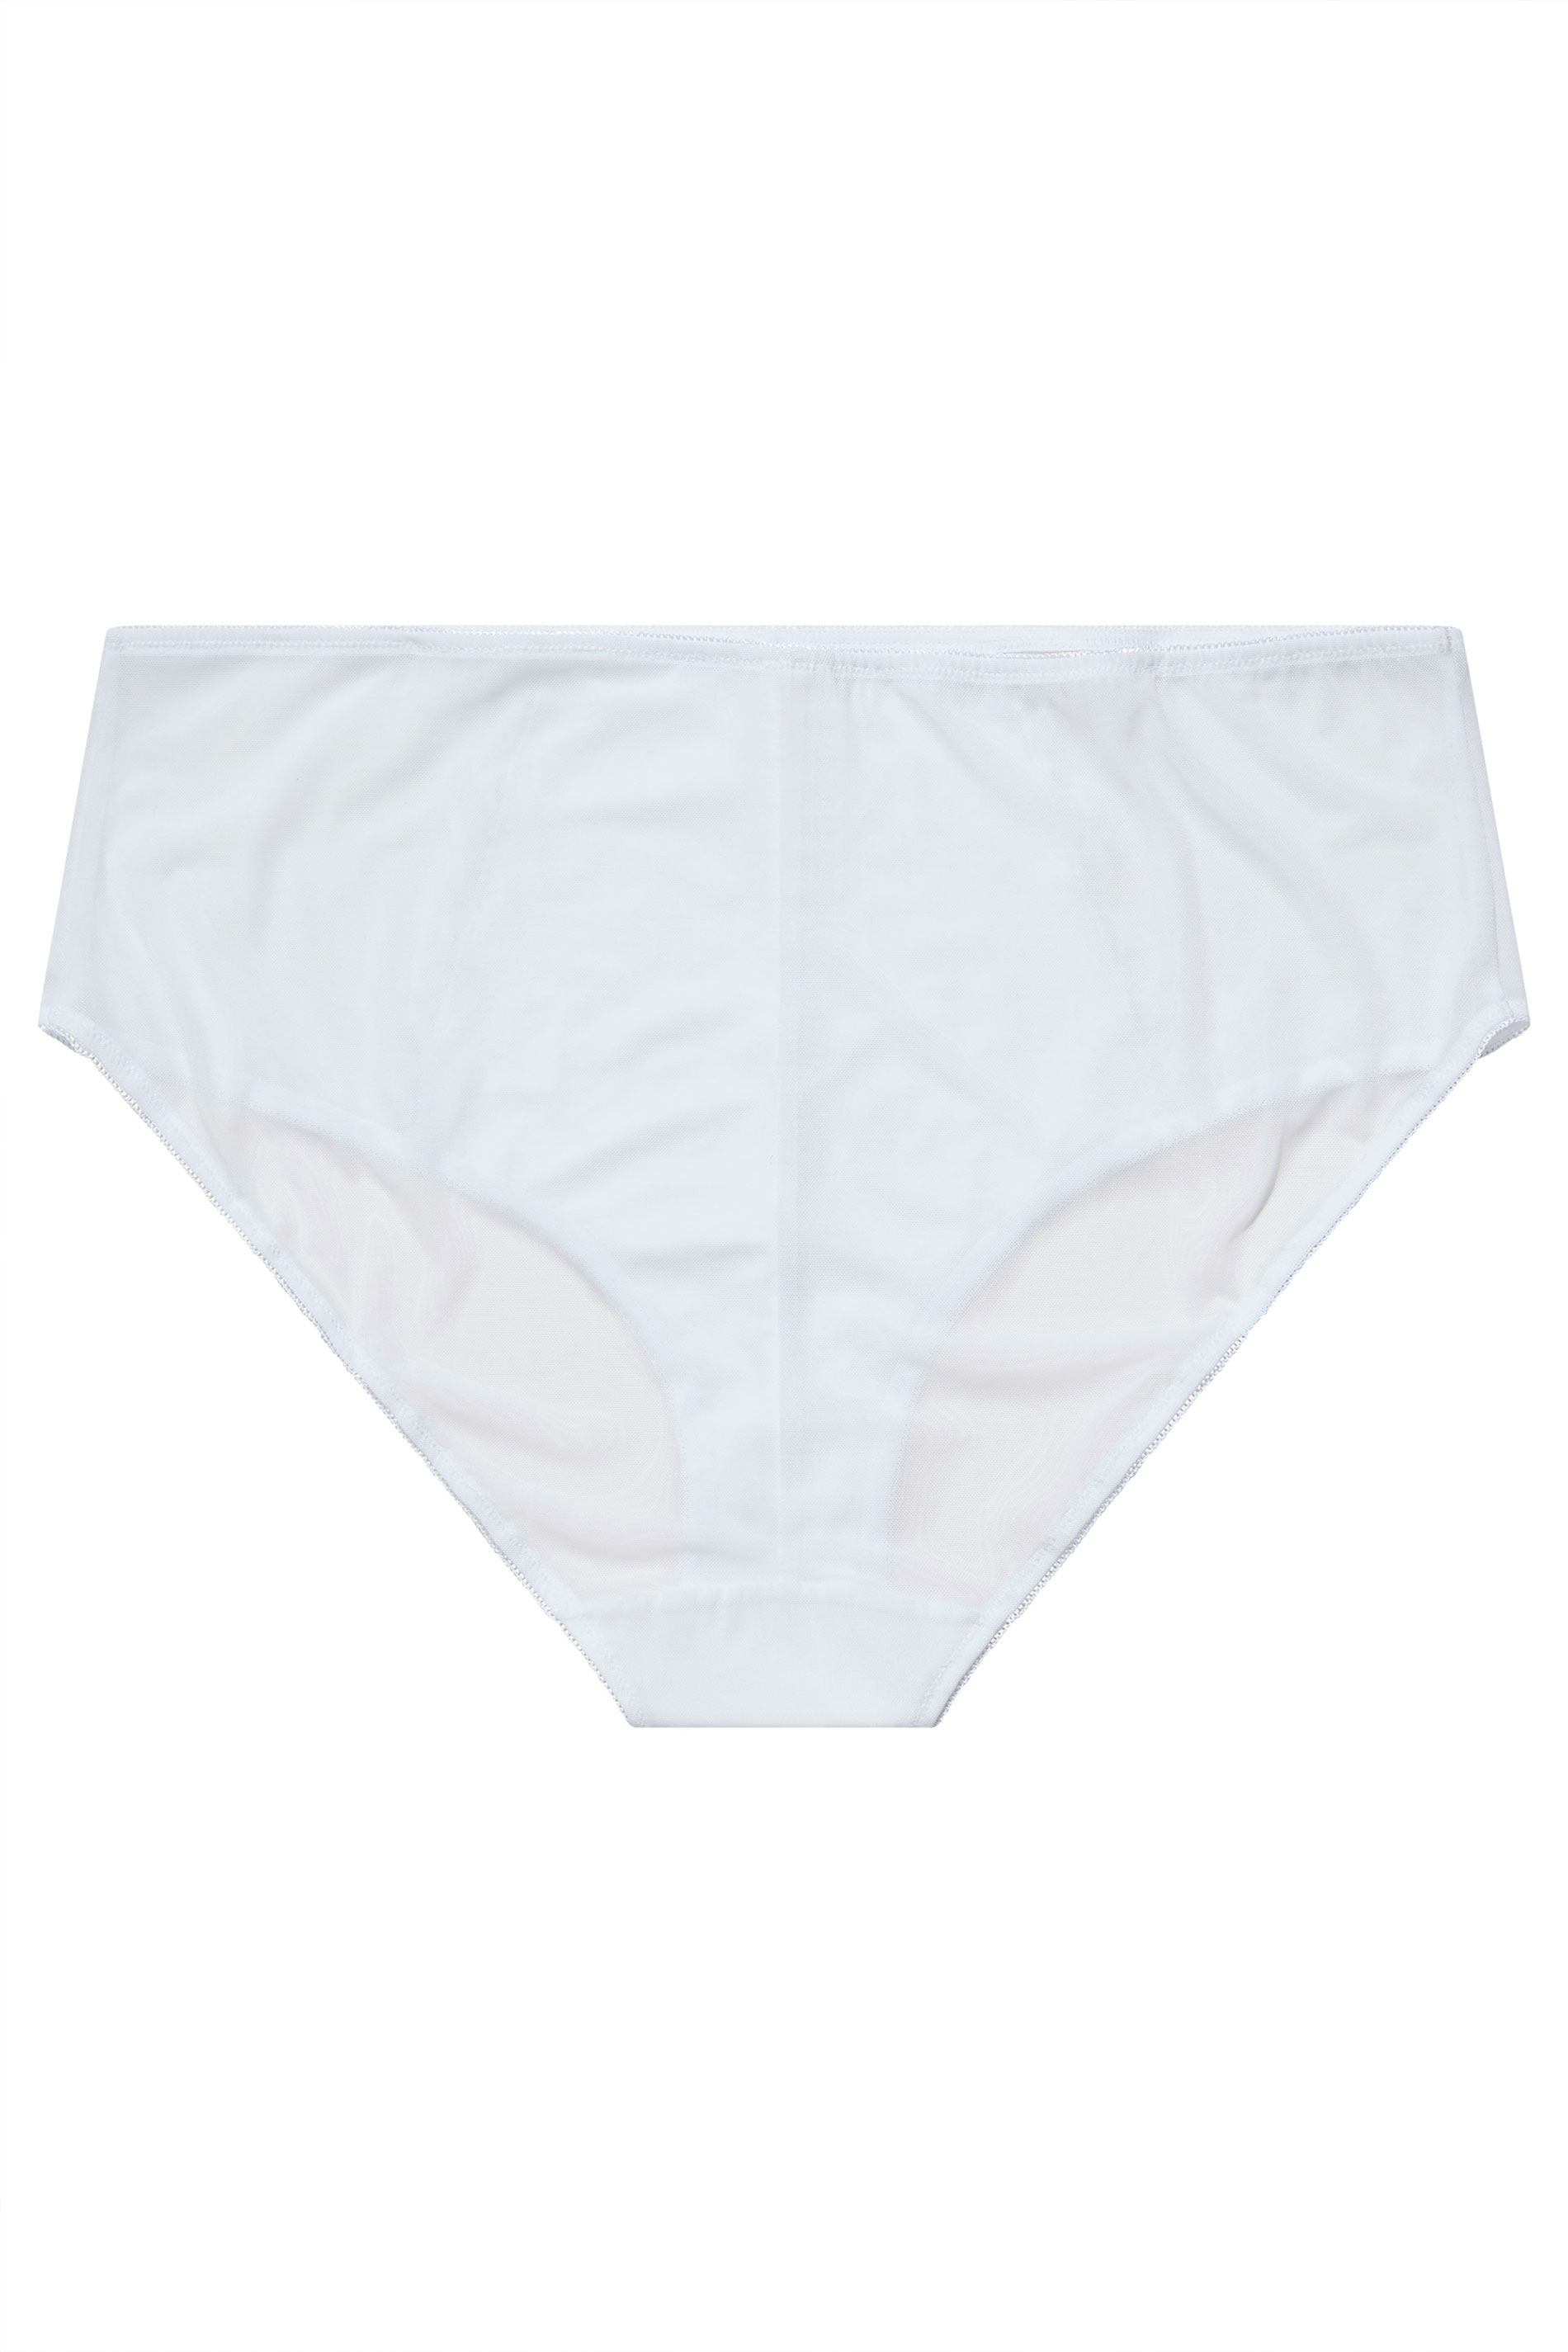 Plus Size White Lace Full Mid Rise Full Briefs | Yours Clothing  3